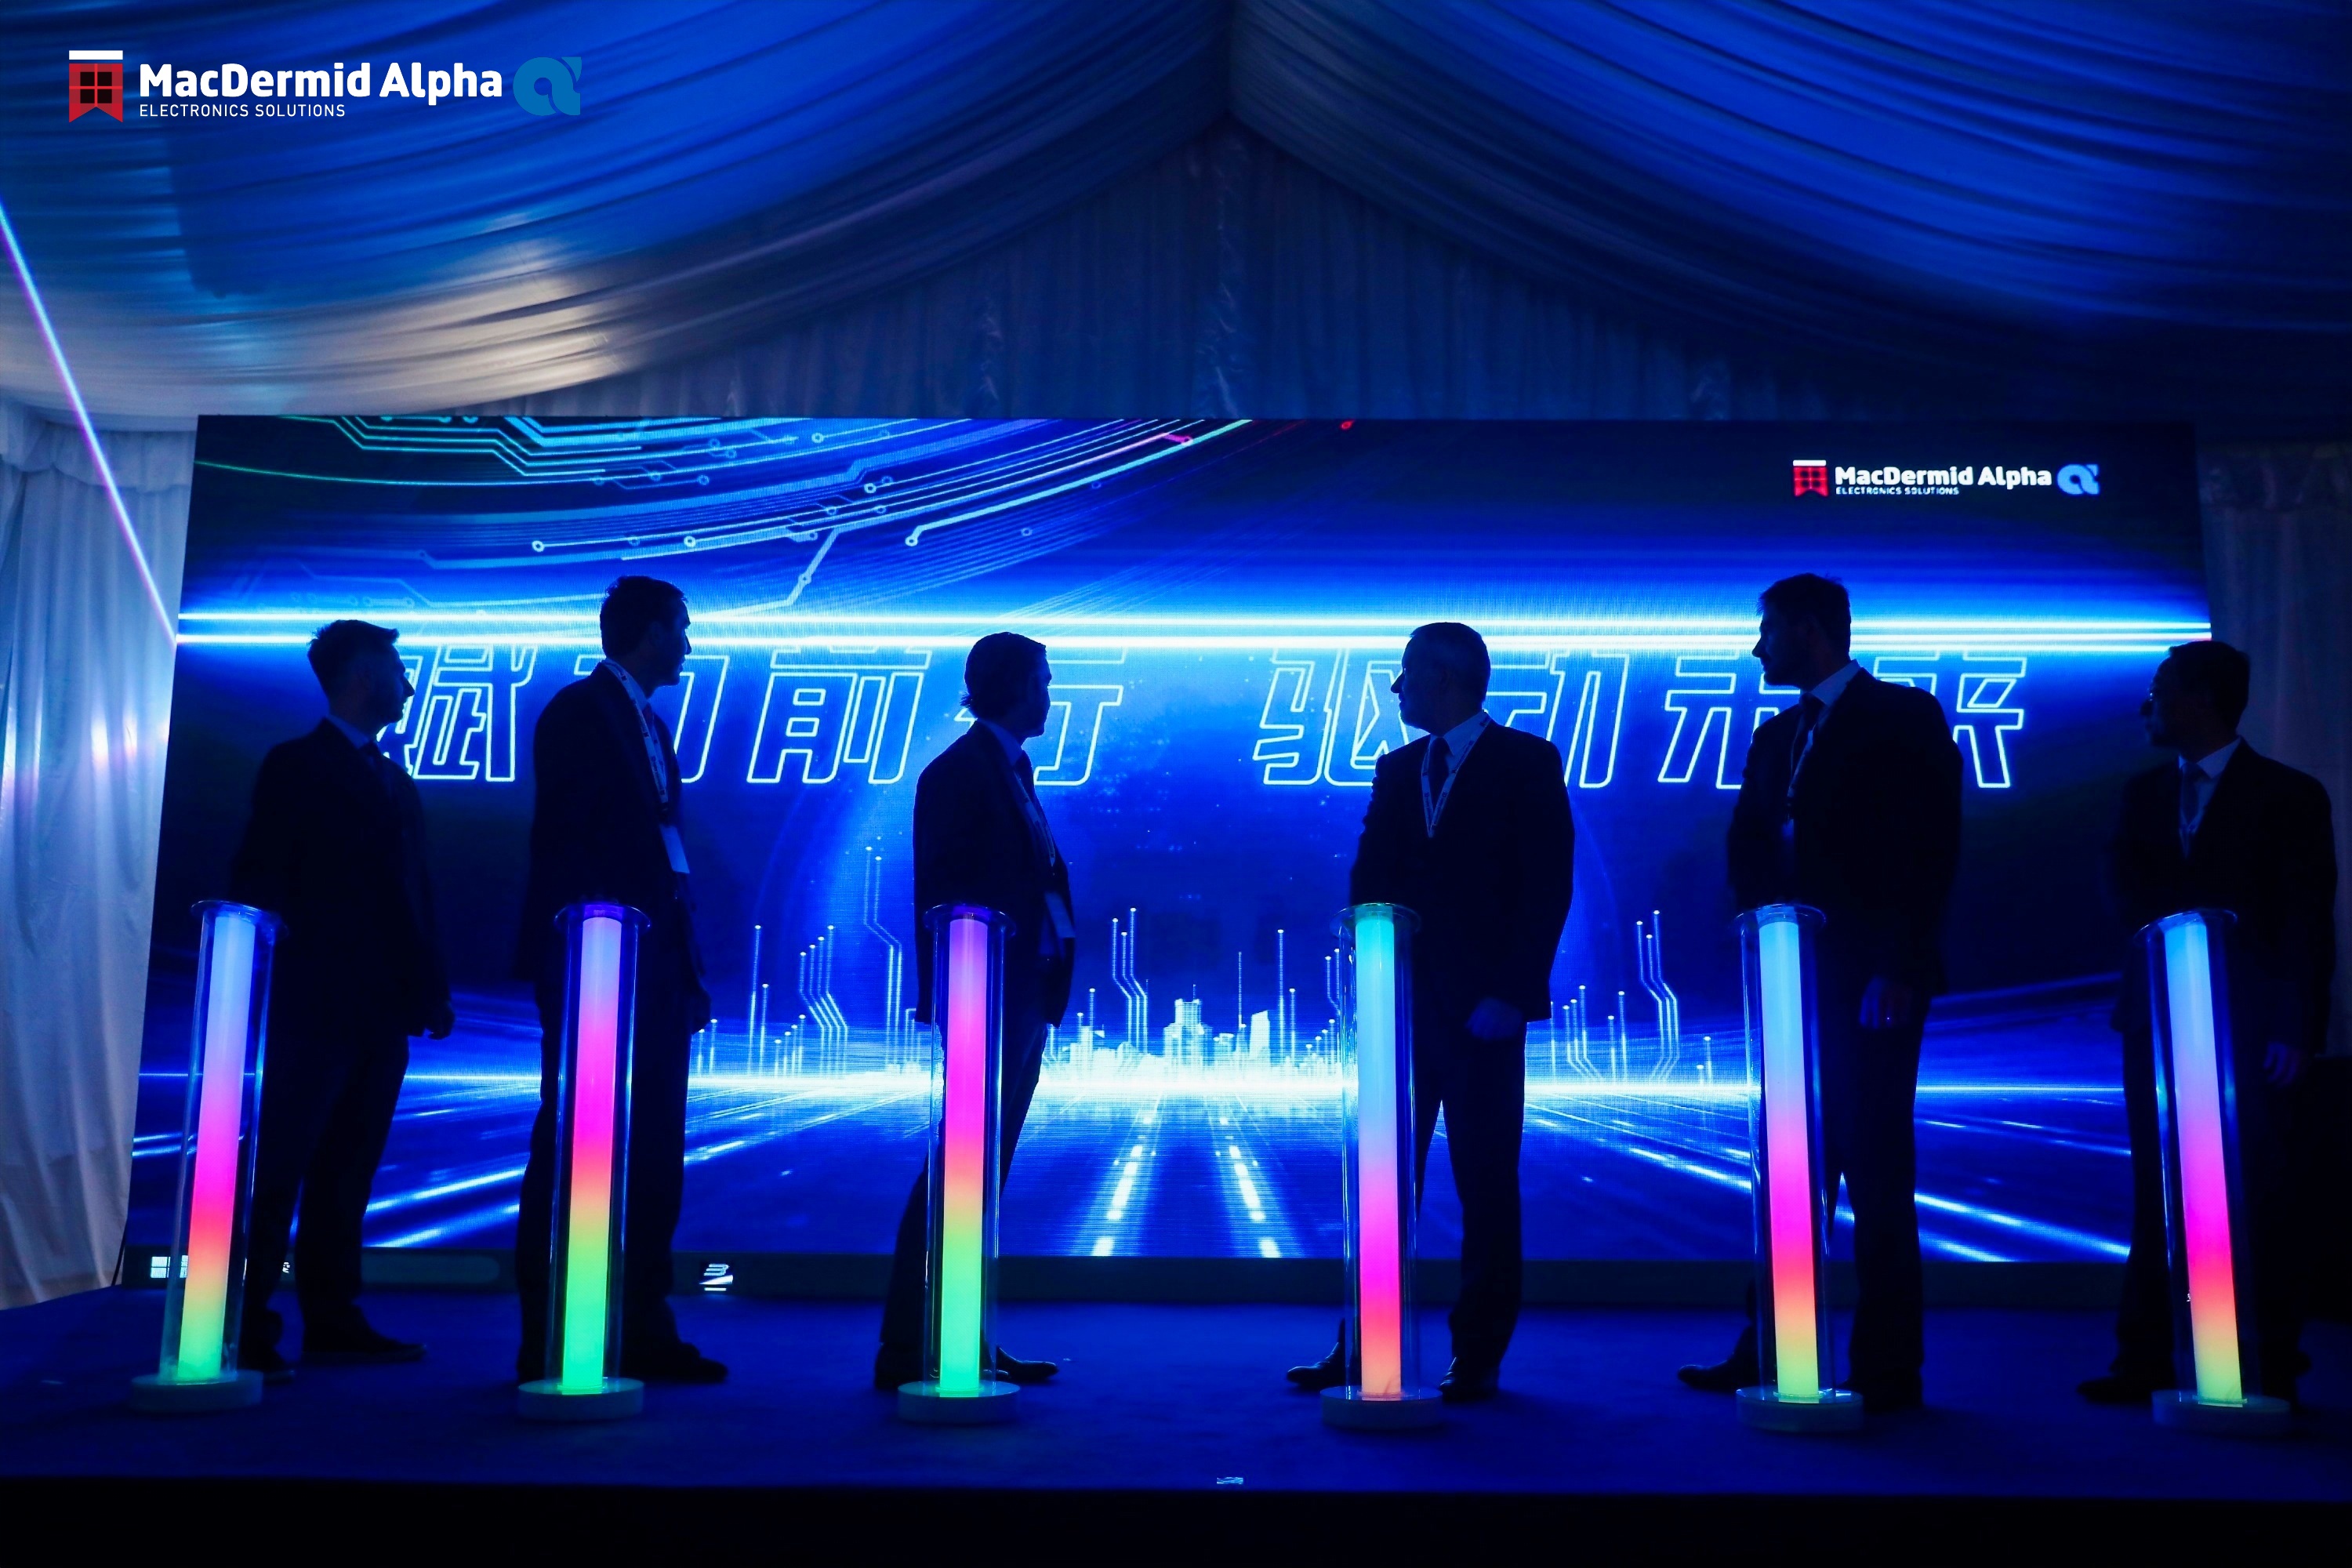 macdermid alpha business men are darkened silhouettes standing at rainbow-LED podiums in a dark room with neon blue backdrop on stage